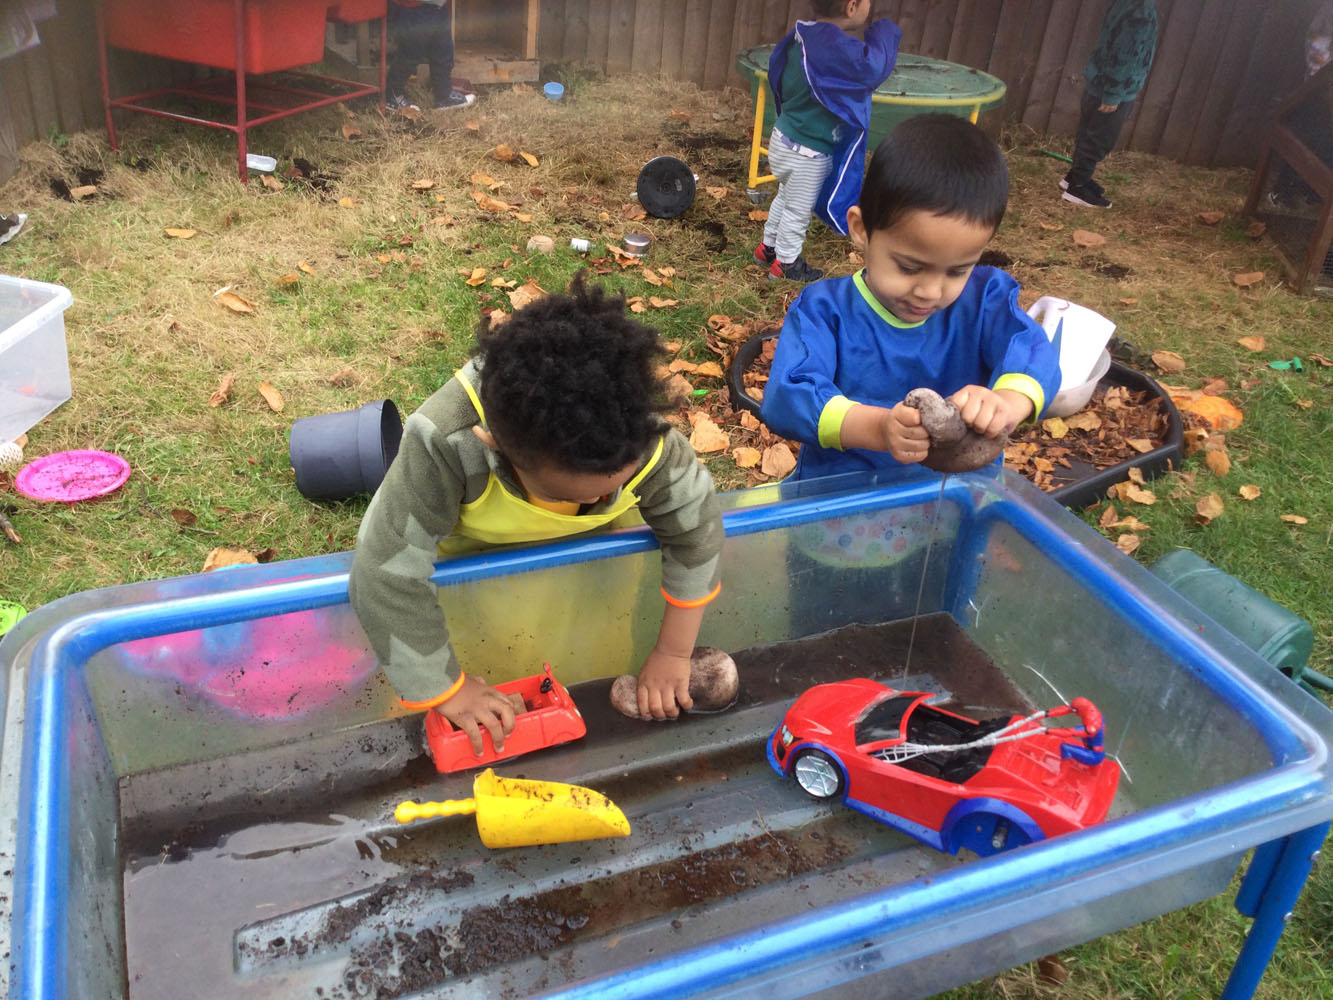 Children playing with mud and toy cars